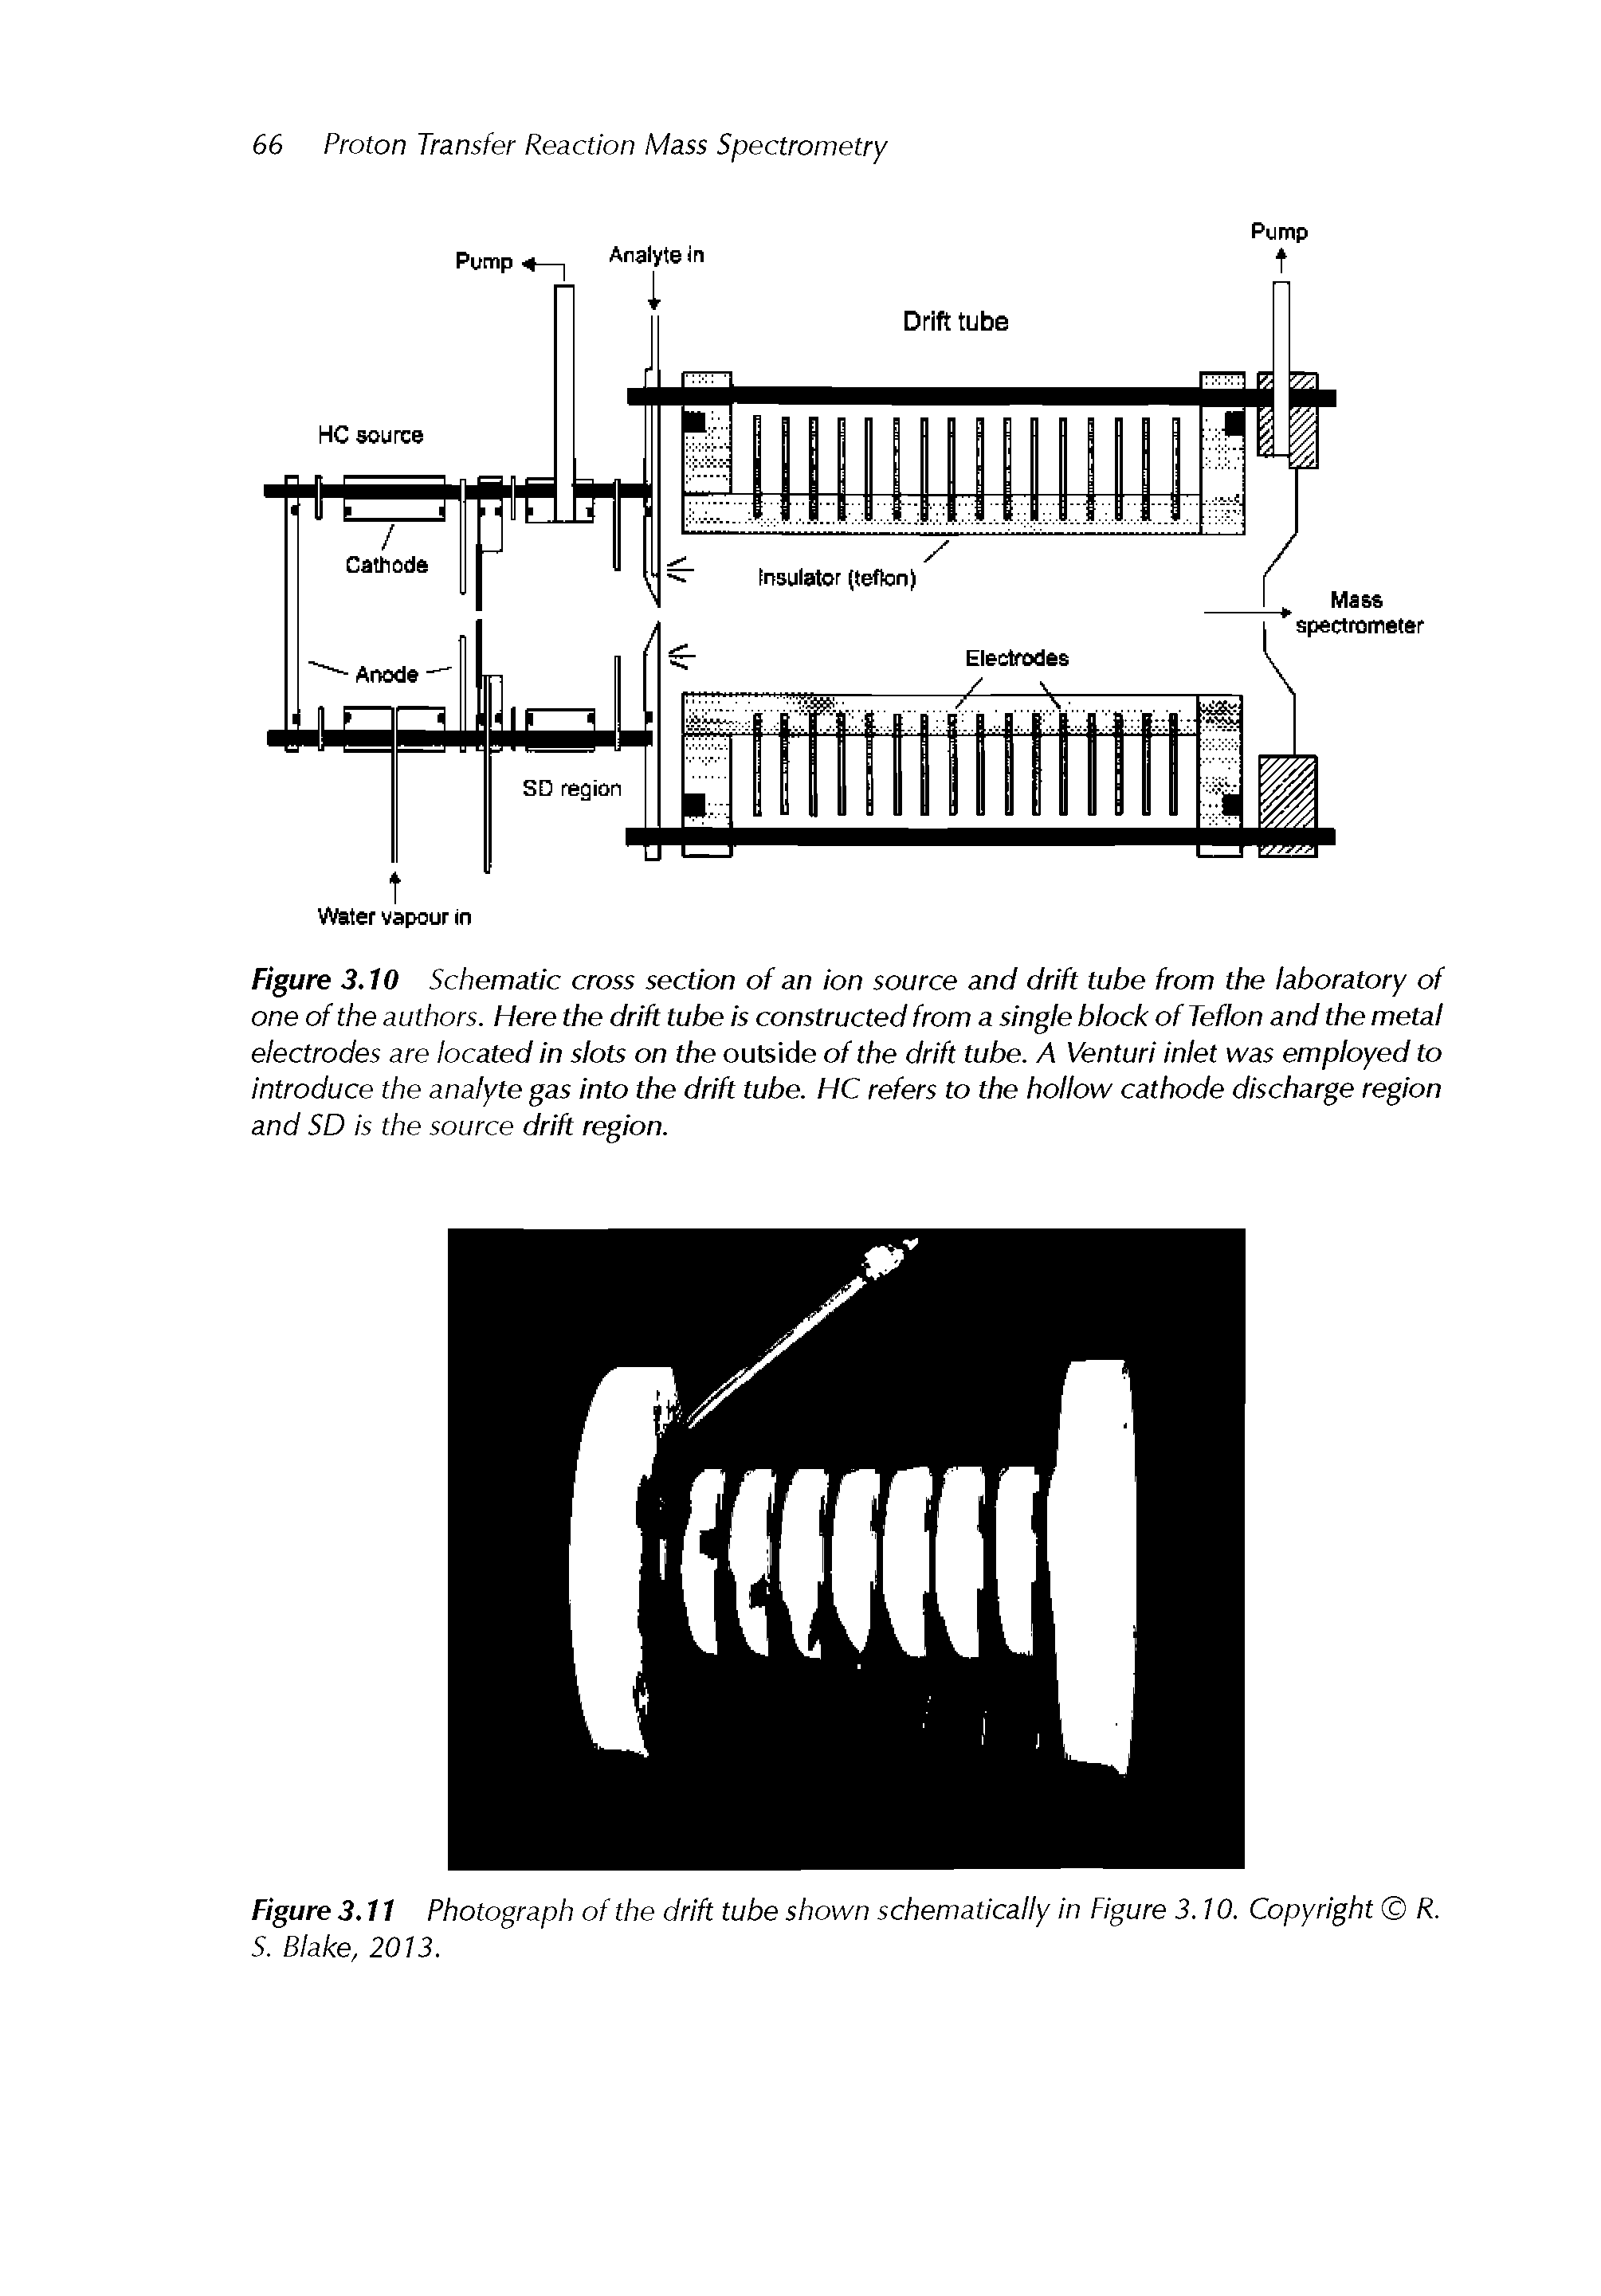 Figure 3.10 Schematic cross section of an ion source and drift tube from the laboratory of one of the authors. Here the drift tube is constructed from a single block of Teflon and the metal electrodes are located in slots on the outside of the drift tube. A Venturi inlet was employed to introduce the analyte gas into the drift tube. HC refers to the hollow cathode discharge region...